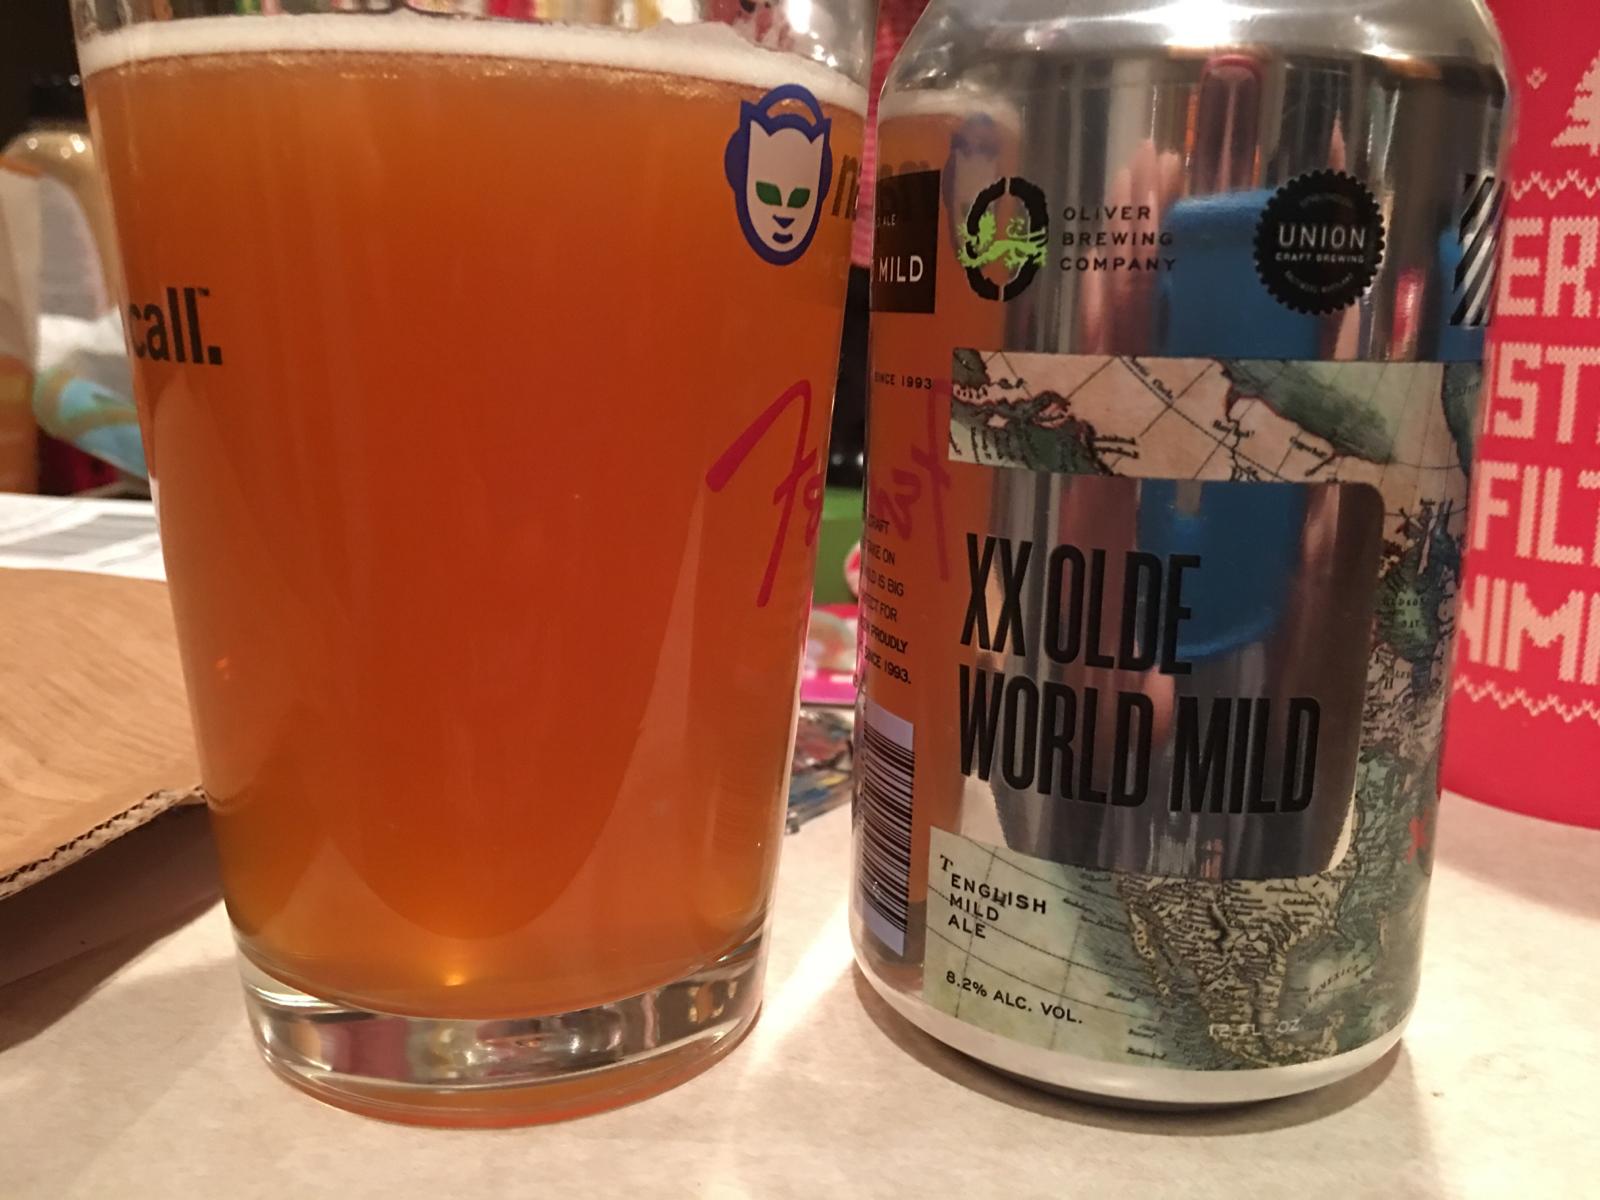 XX Olde World Mild (Collaboration with Union Craft Brewing)